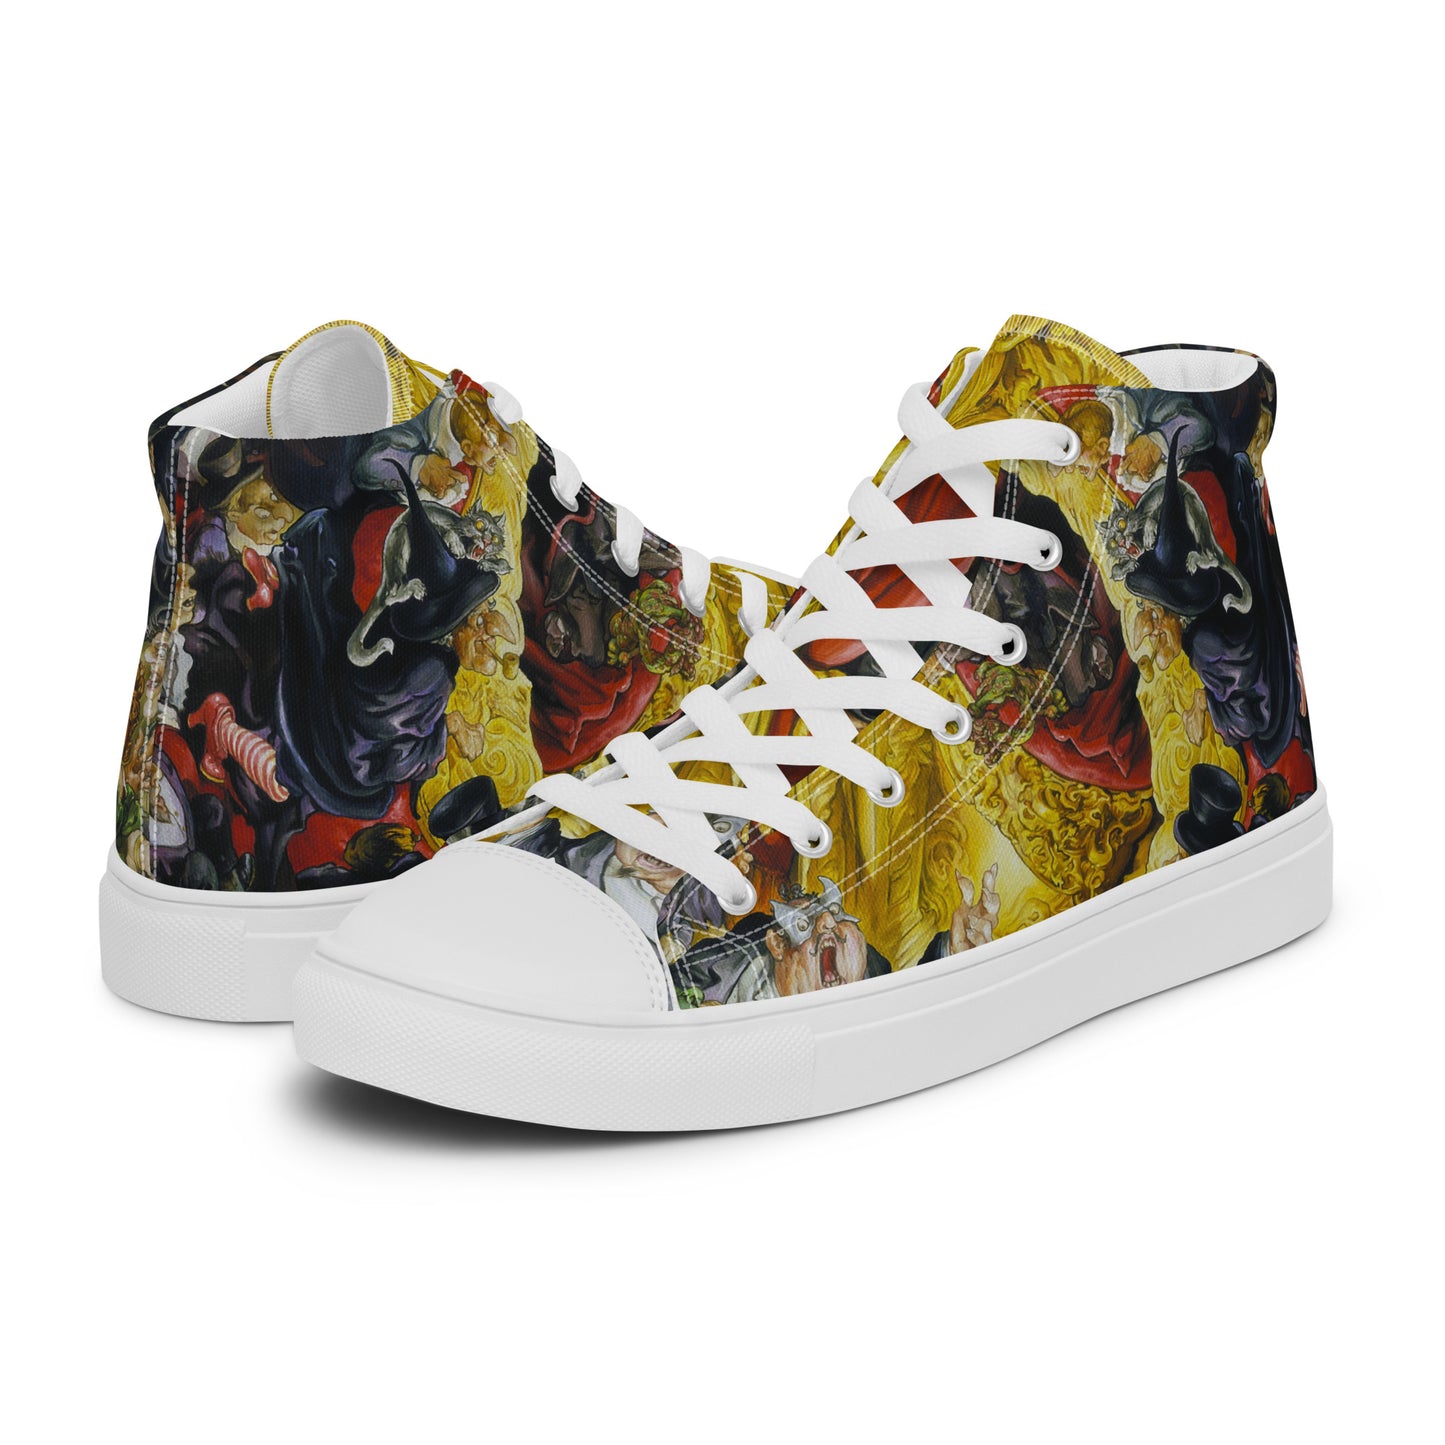 Maskerade Women’s High Top Canvas Shoes - Free Shipping *US SIZES SHOWN! USE CHART!